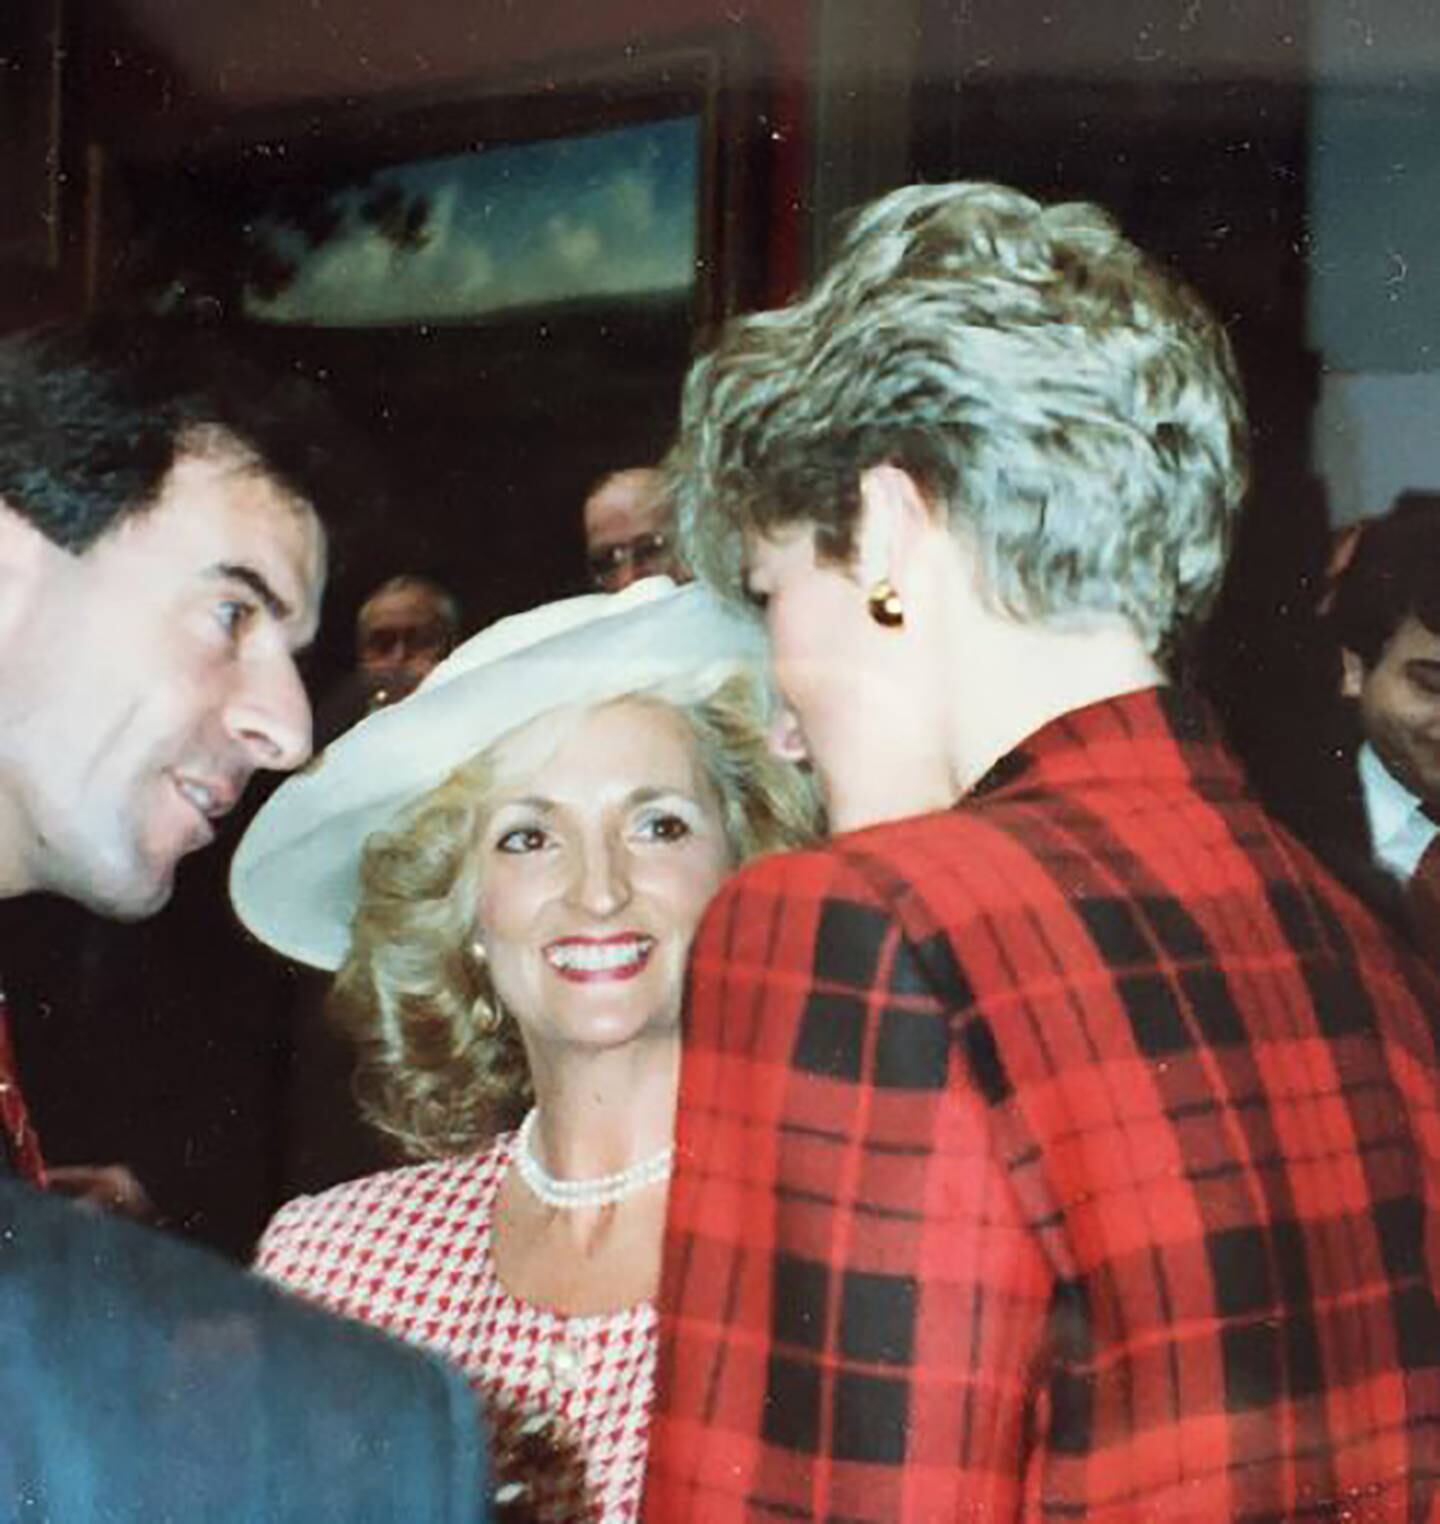 Edith Conn chats to Princess Diana during their meeting at a Red Cross charity event in Manchester in 1990. Photo: Edith Conn/British Red Cross